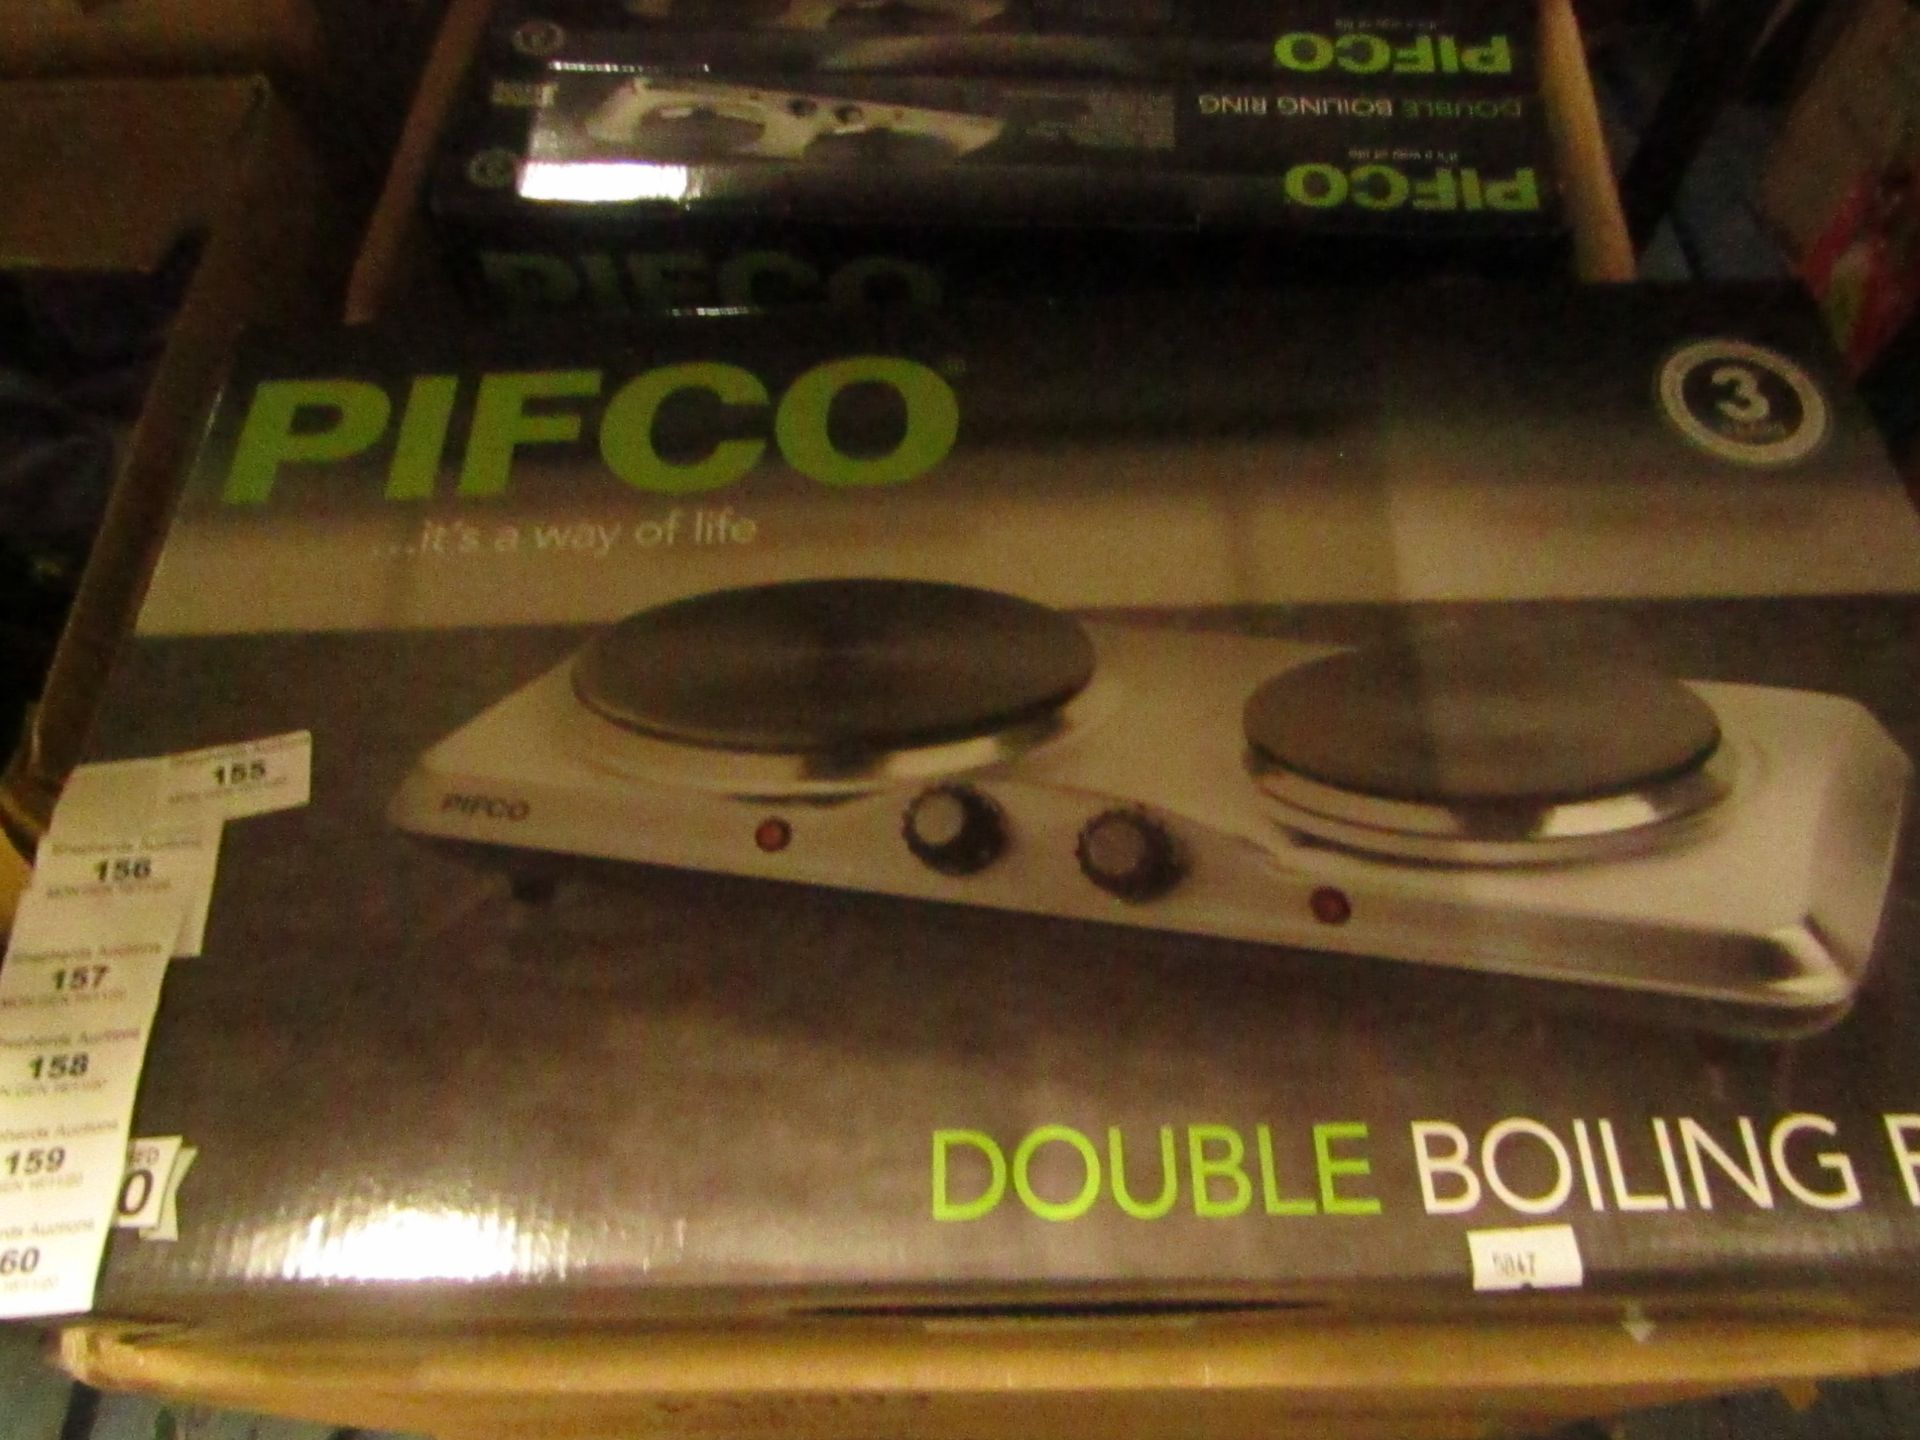 Pifco double boiling ring, unchecked and boxed.